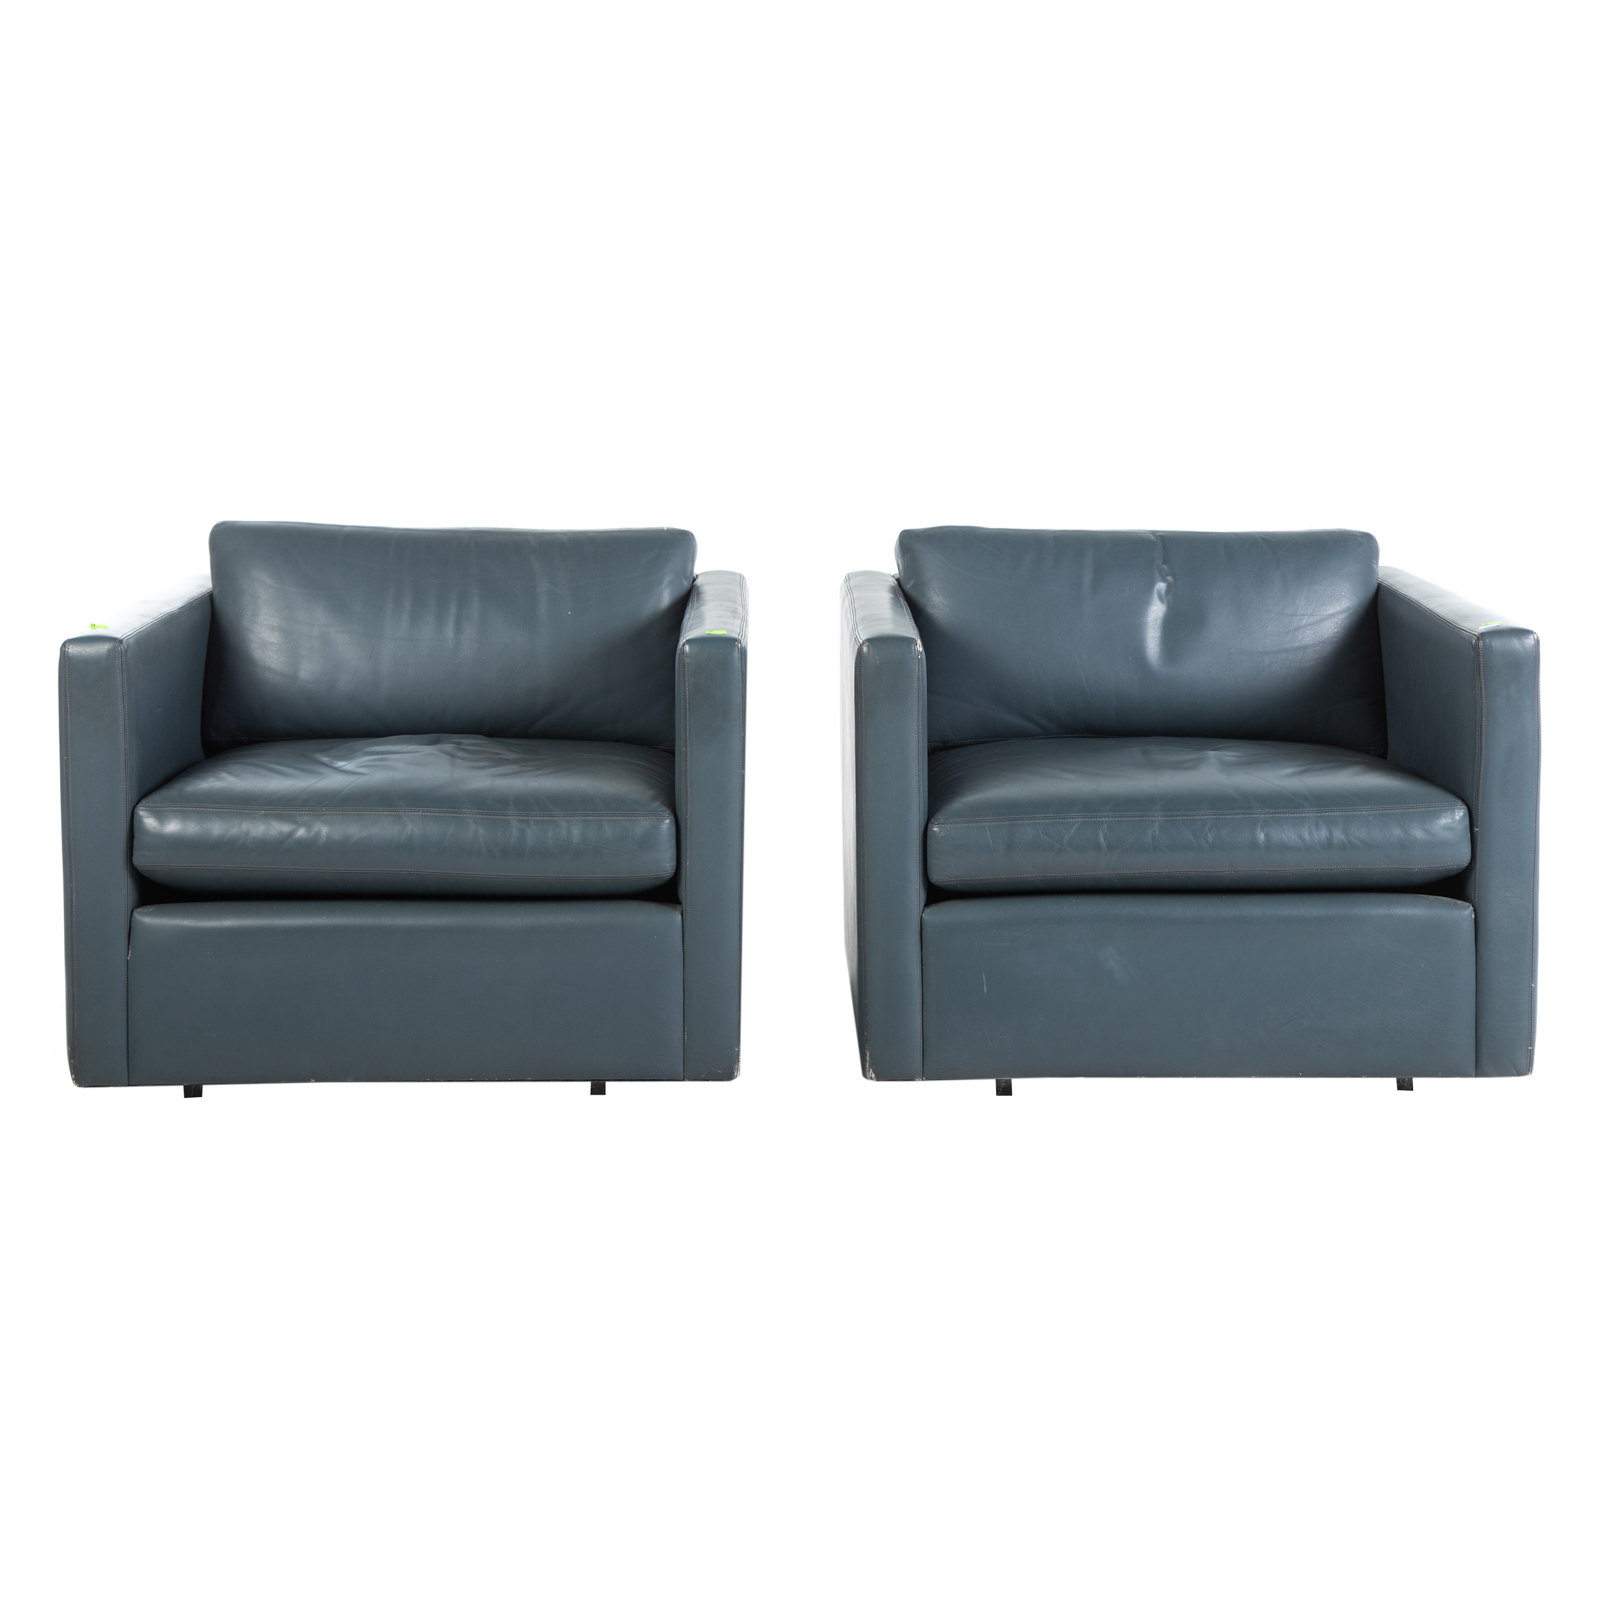 A PAIR OF CHARLES PFISTER FOR KNOLL